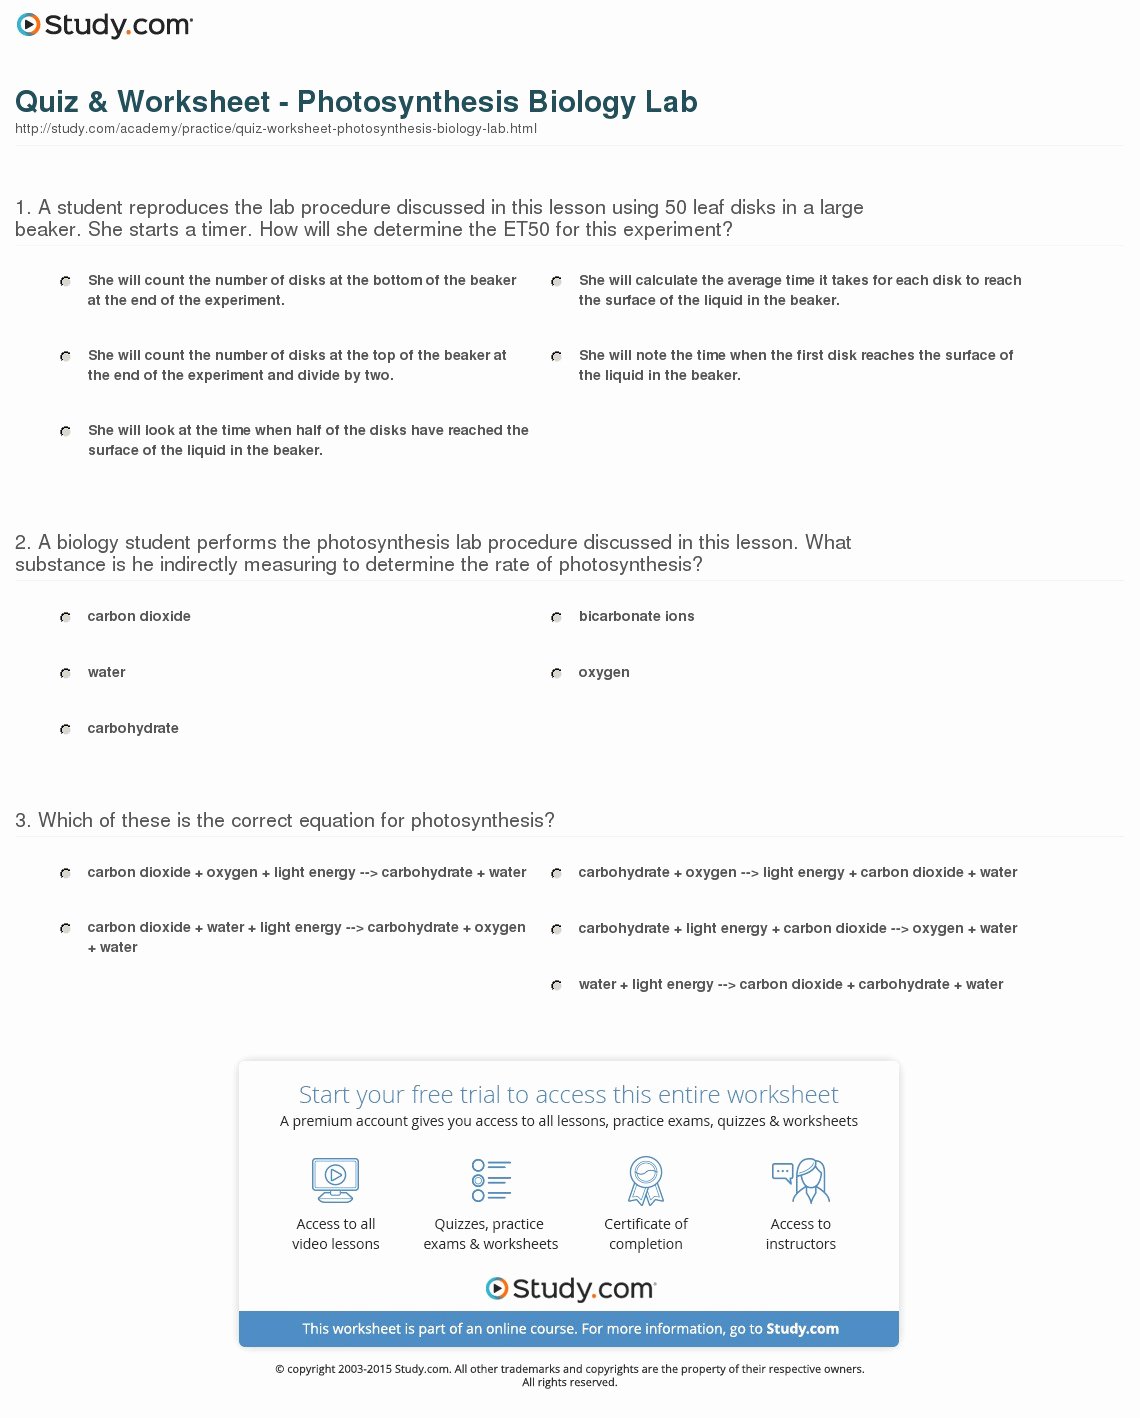 Photosynthesis Worksheet High School Awesome Synthesis Lesson for High School Lifescitrc General